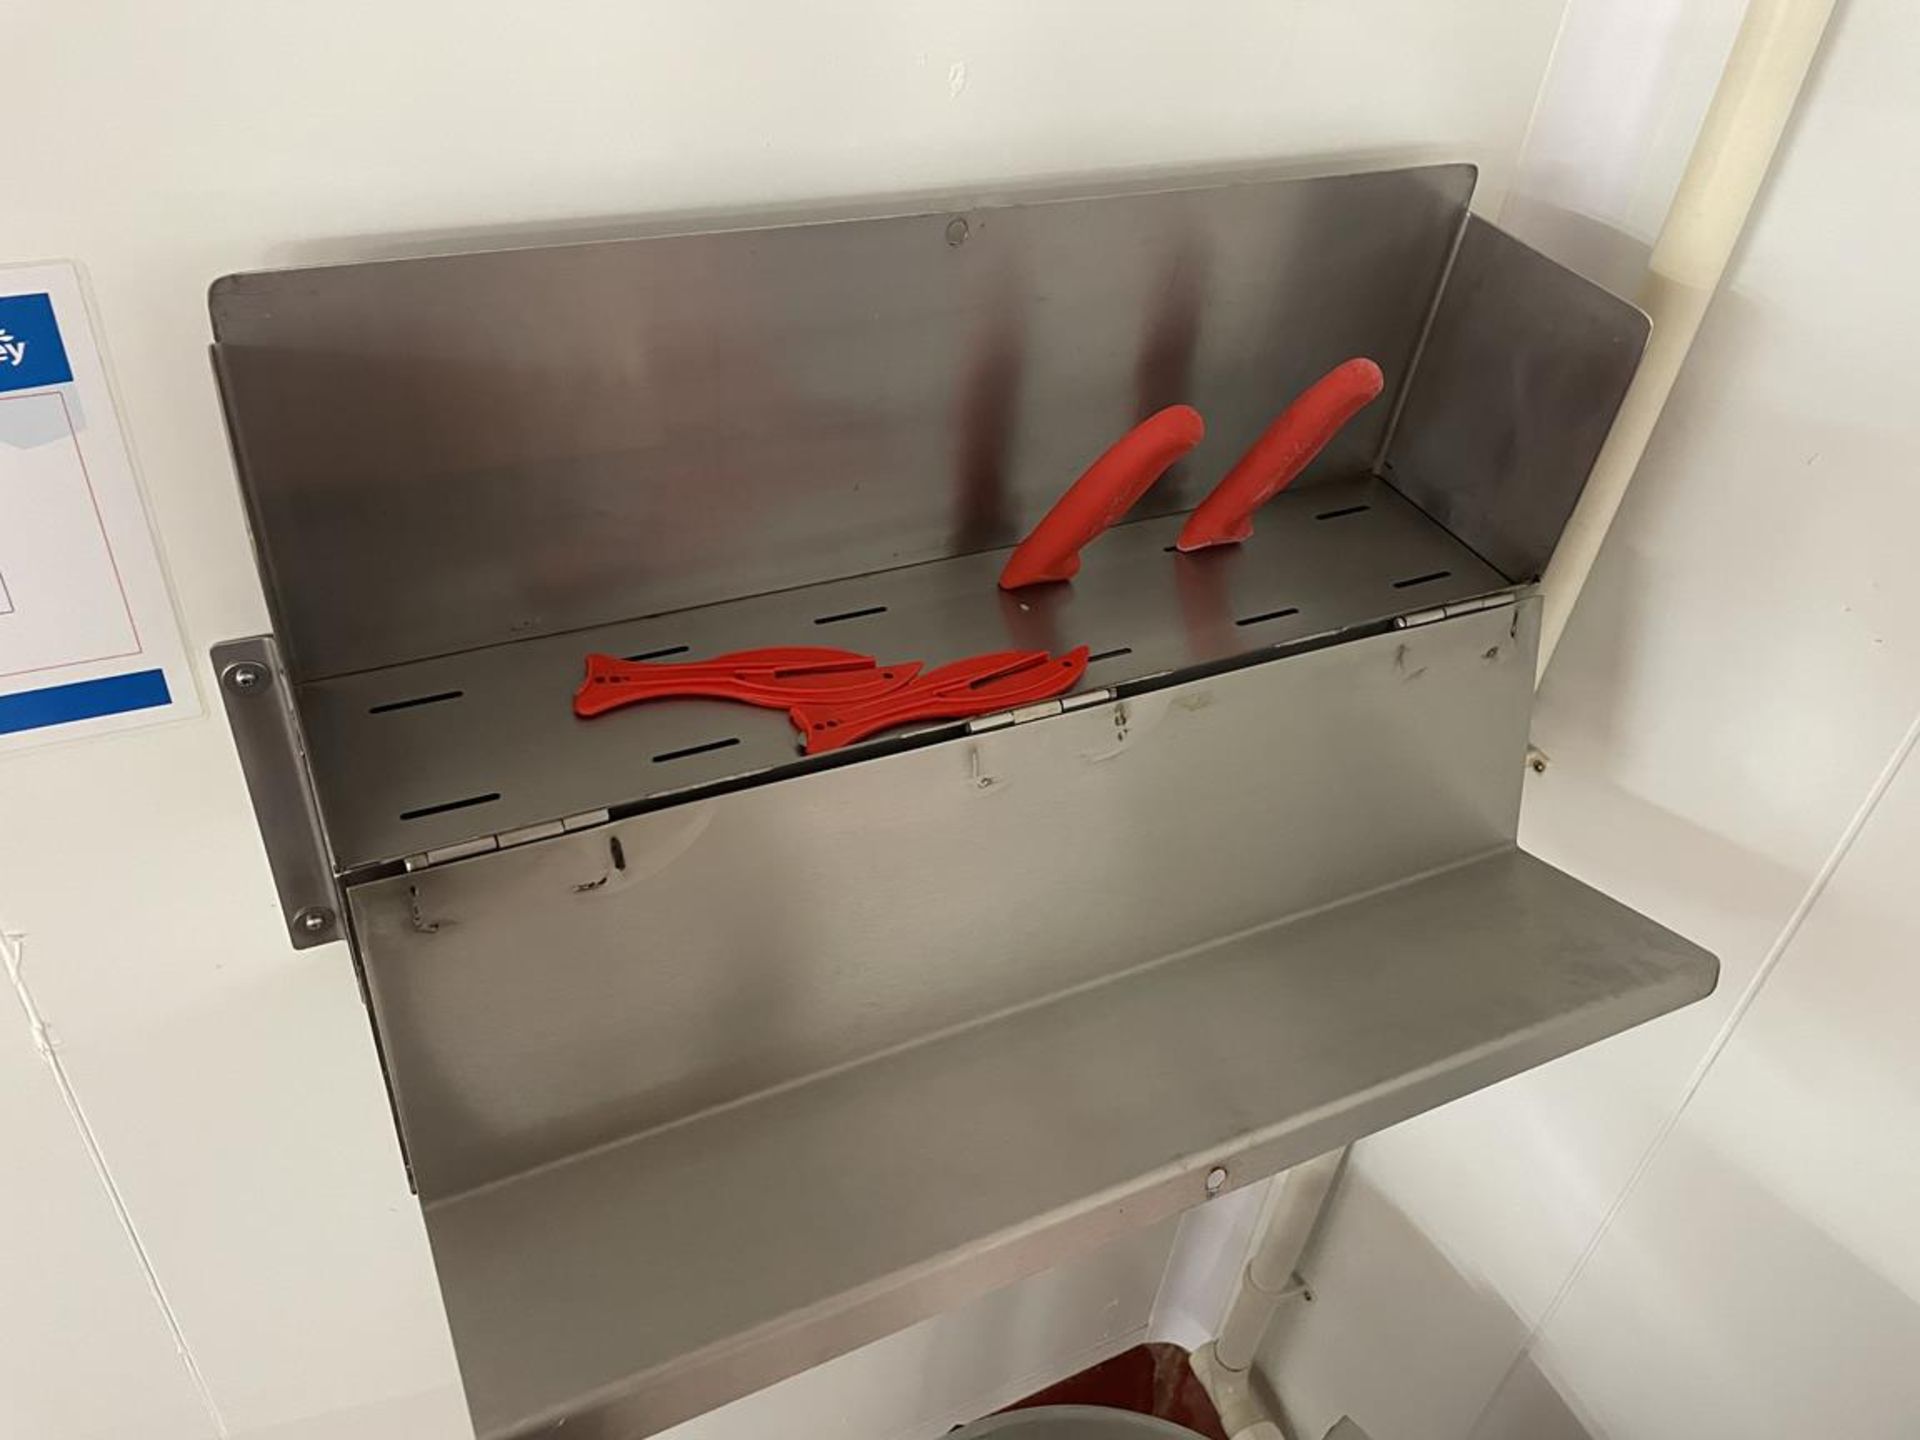 Teknomek, Hygienox stainless steel glove dispenser and 12 knife stainless steel knife box together - Image 4 of 4